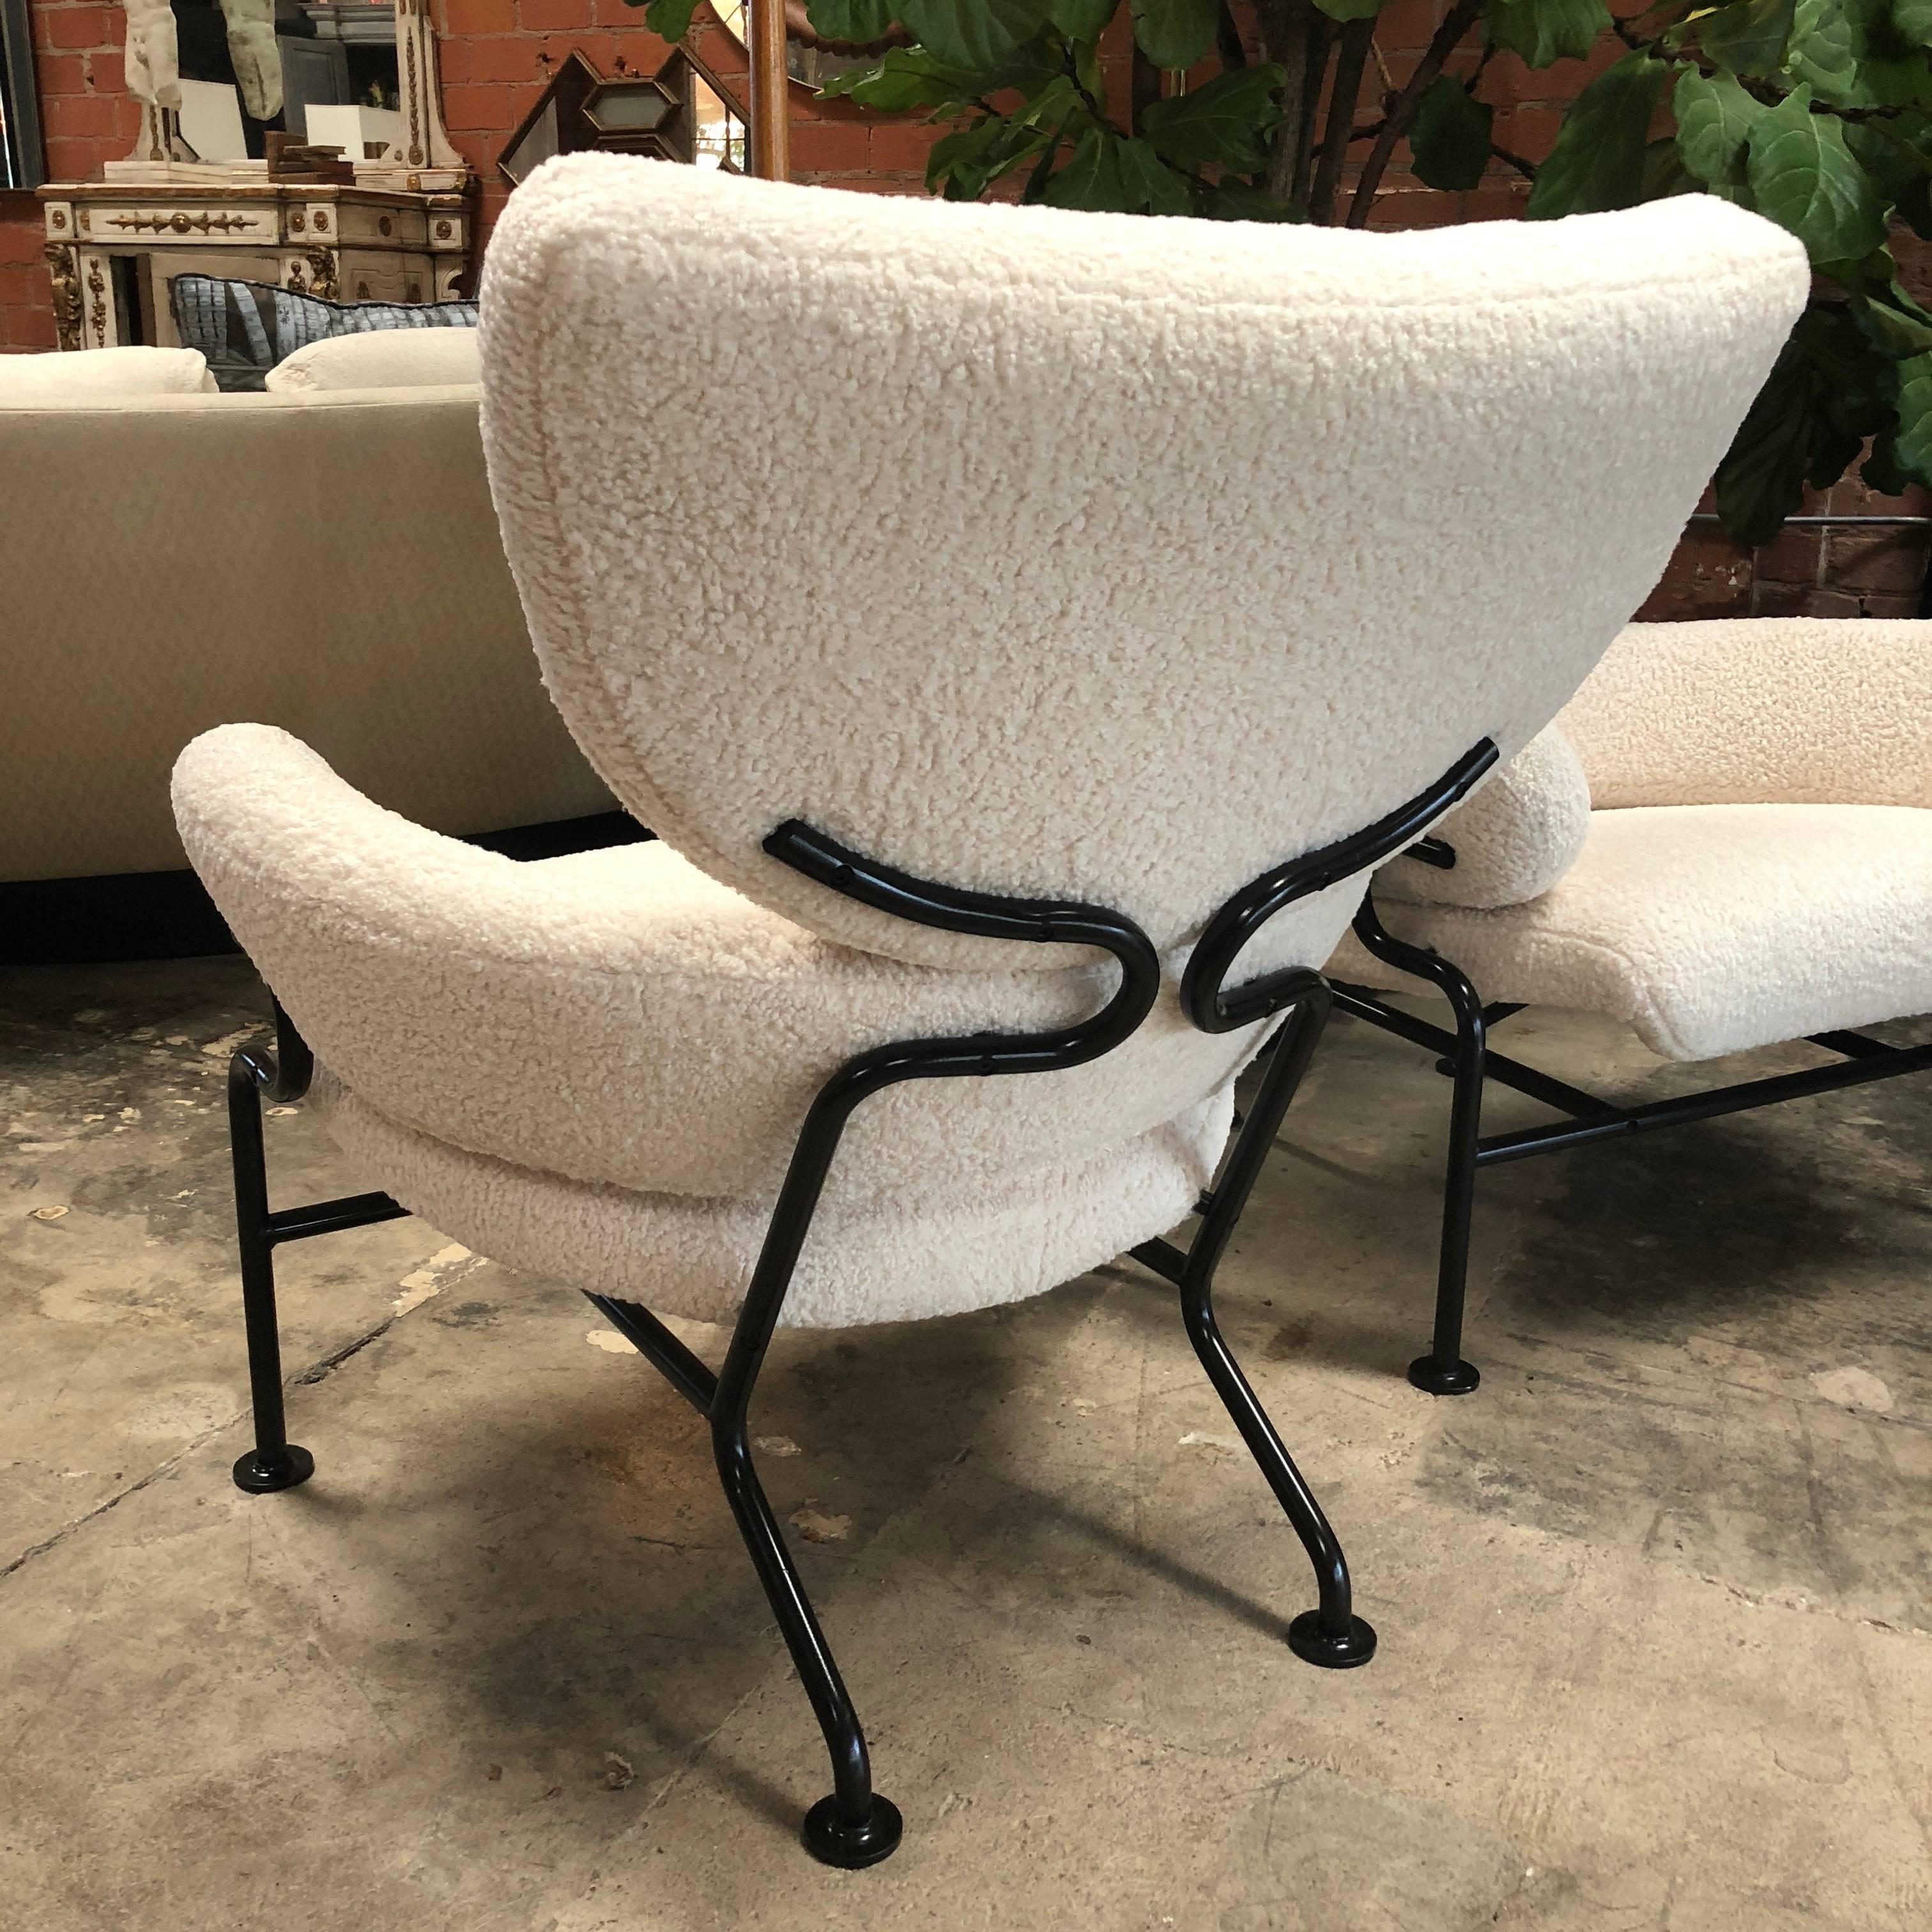 Mid-20th Century Armchairs “Tre Pezzi Pl19” by Franco Albini and Franca Helg